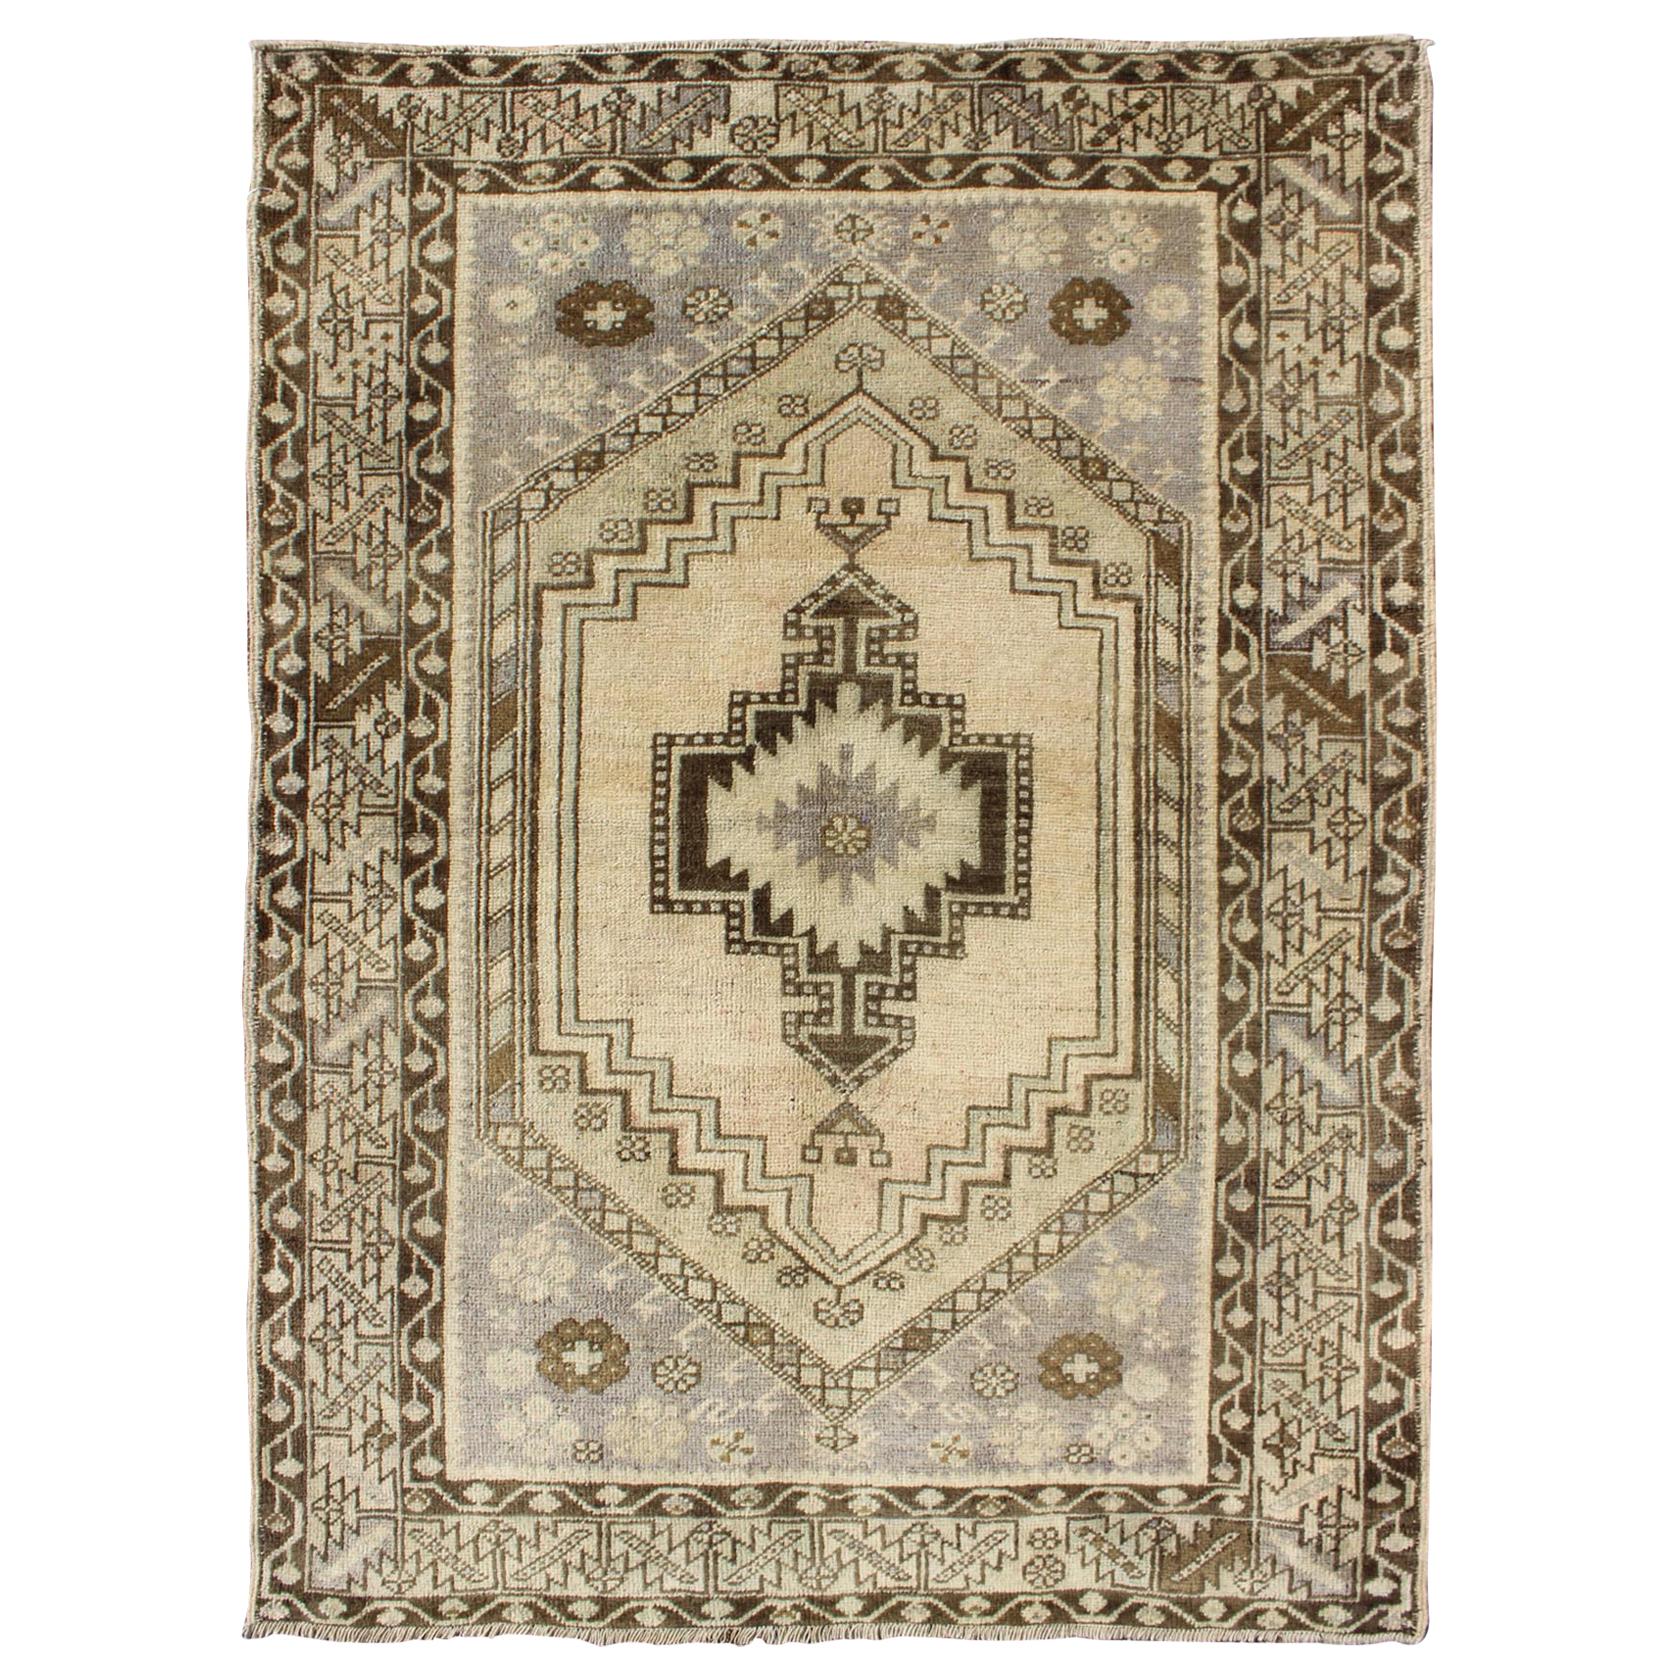 Multi-Layered Medallion Vintage Turkish Oushak Rug in Cream and Shades of Brown